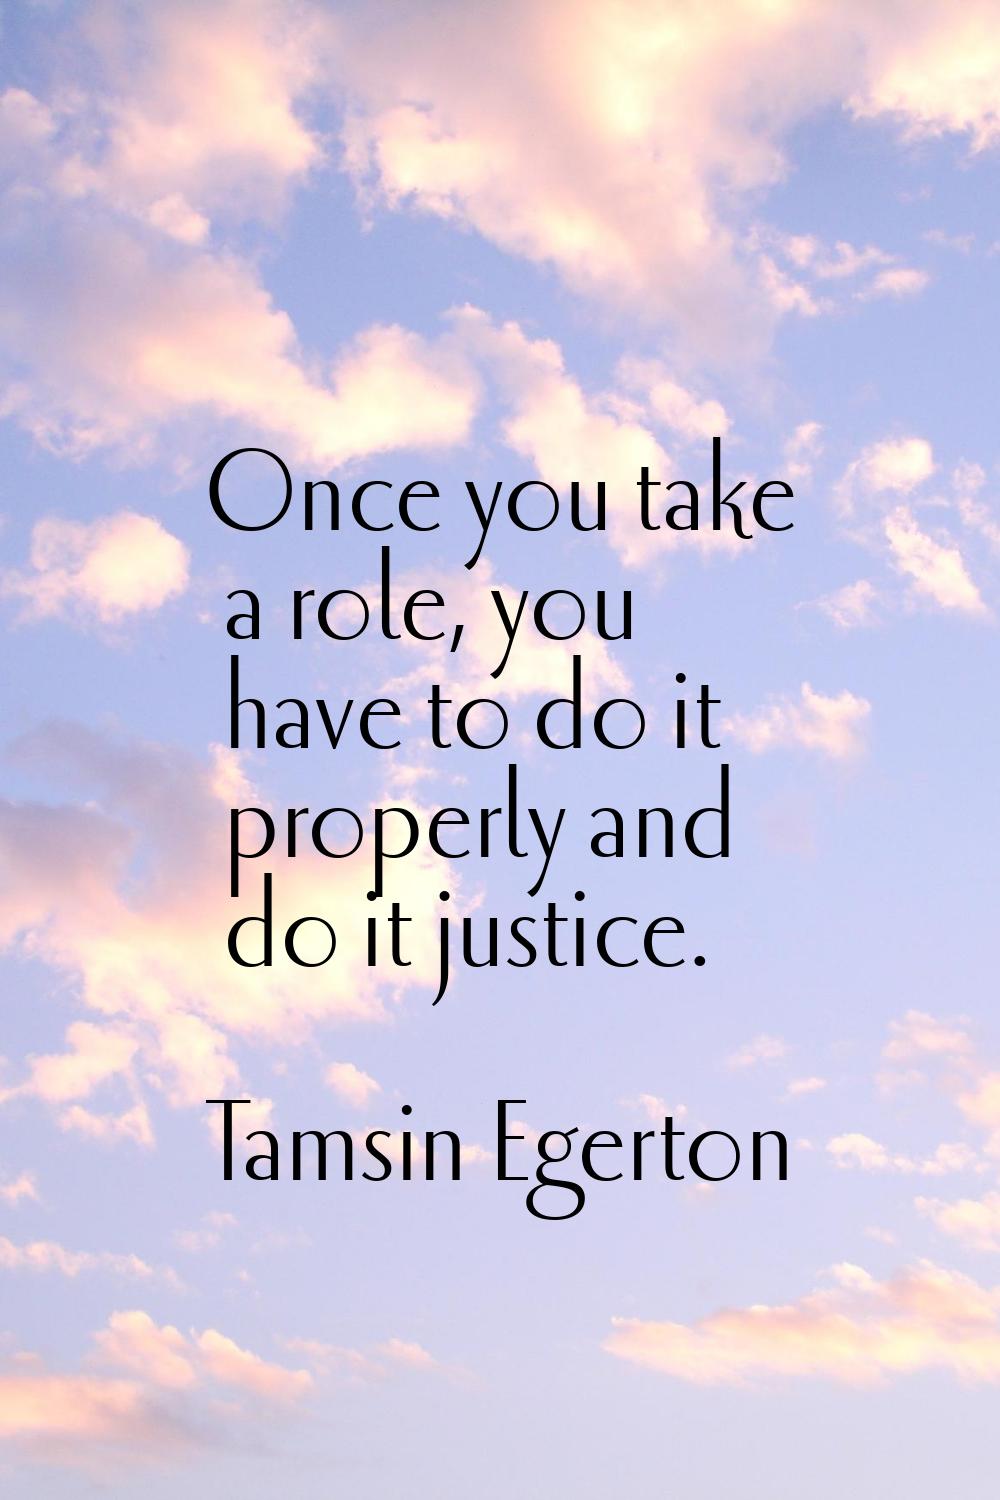 Once you take a role, you have to do it properly and do it justice.